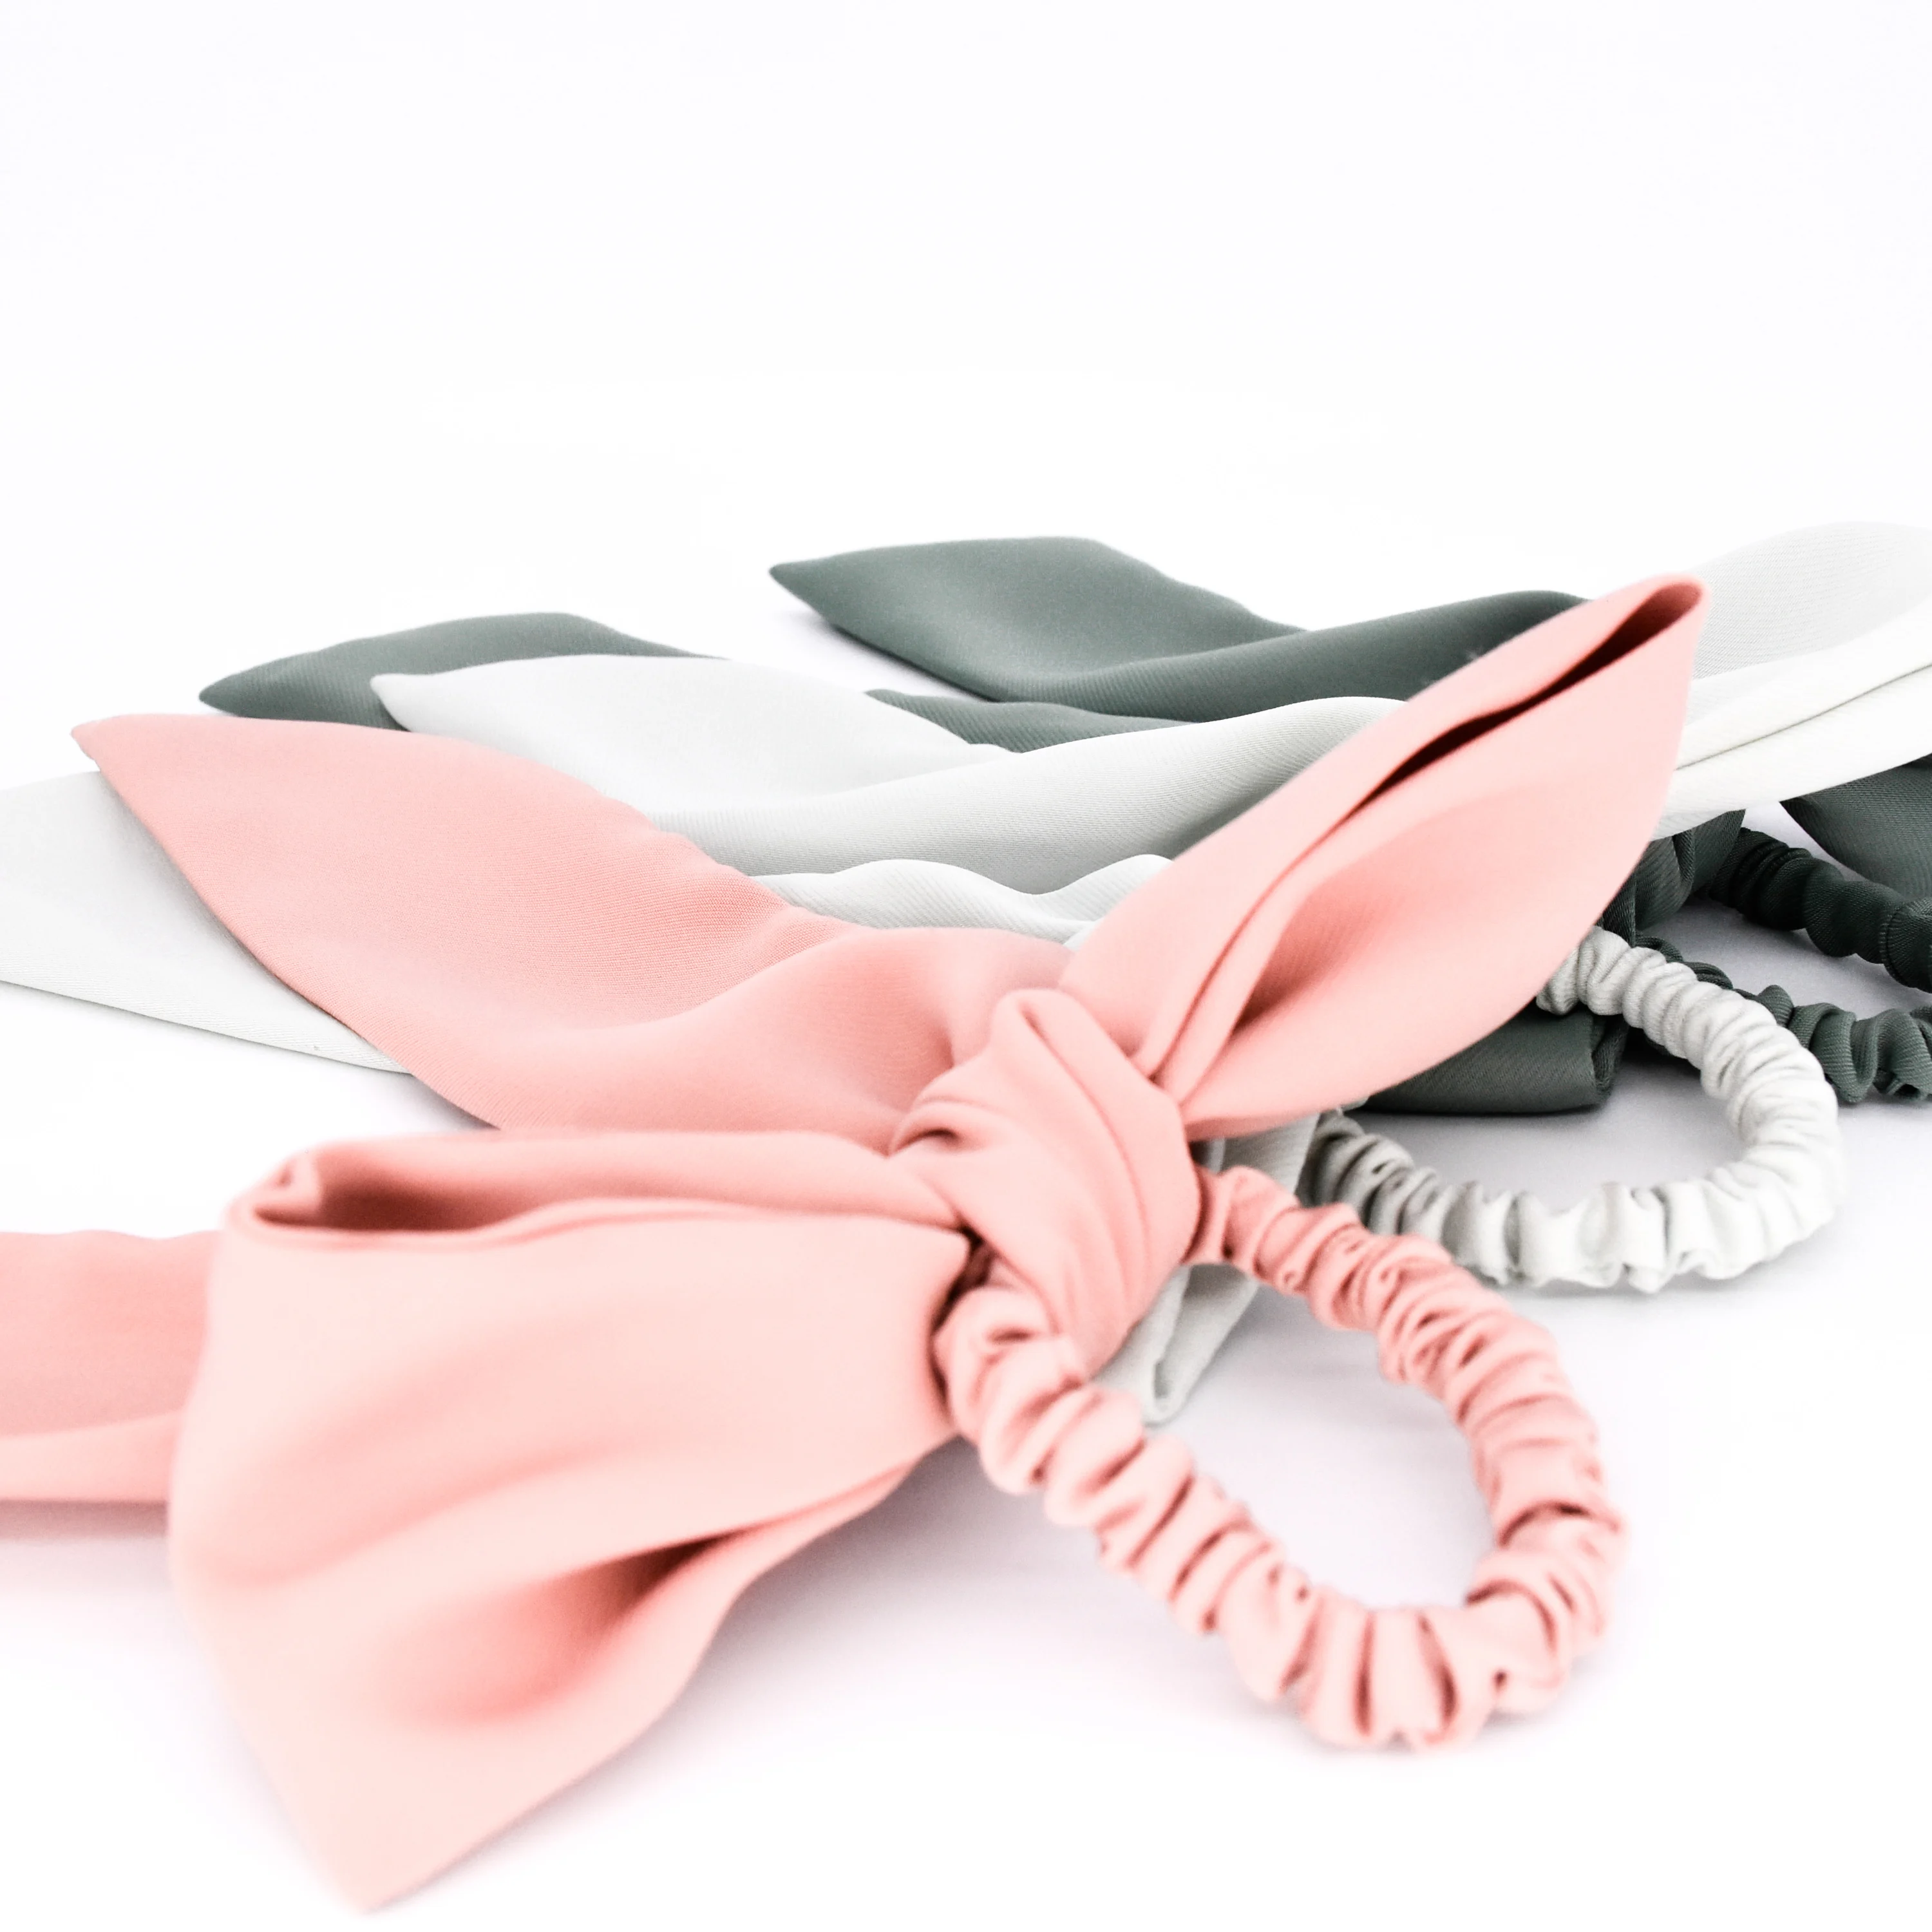 
Wholesale fancy solid color ribbon satin big bow knot hair tie srunchies scarf ponytail holder for women 